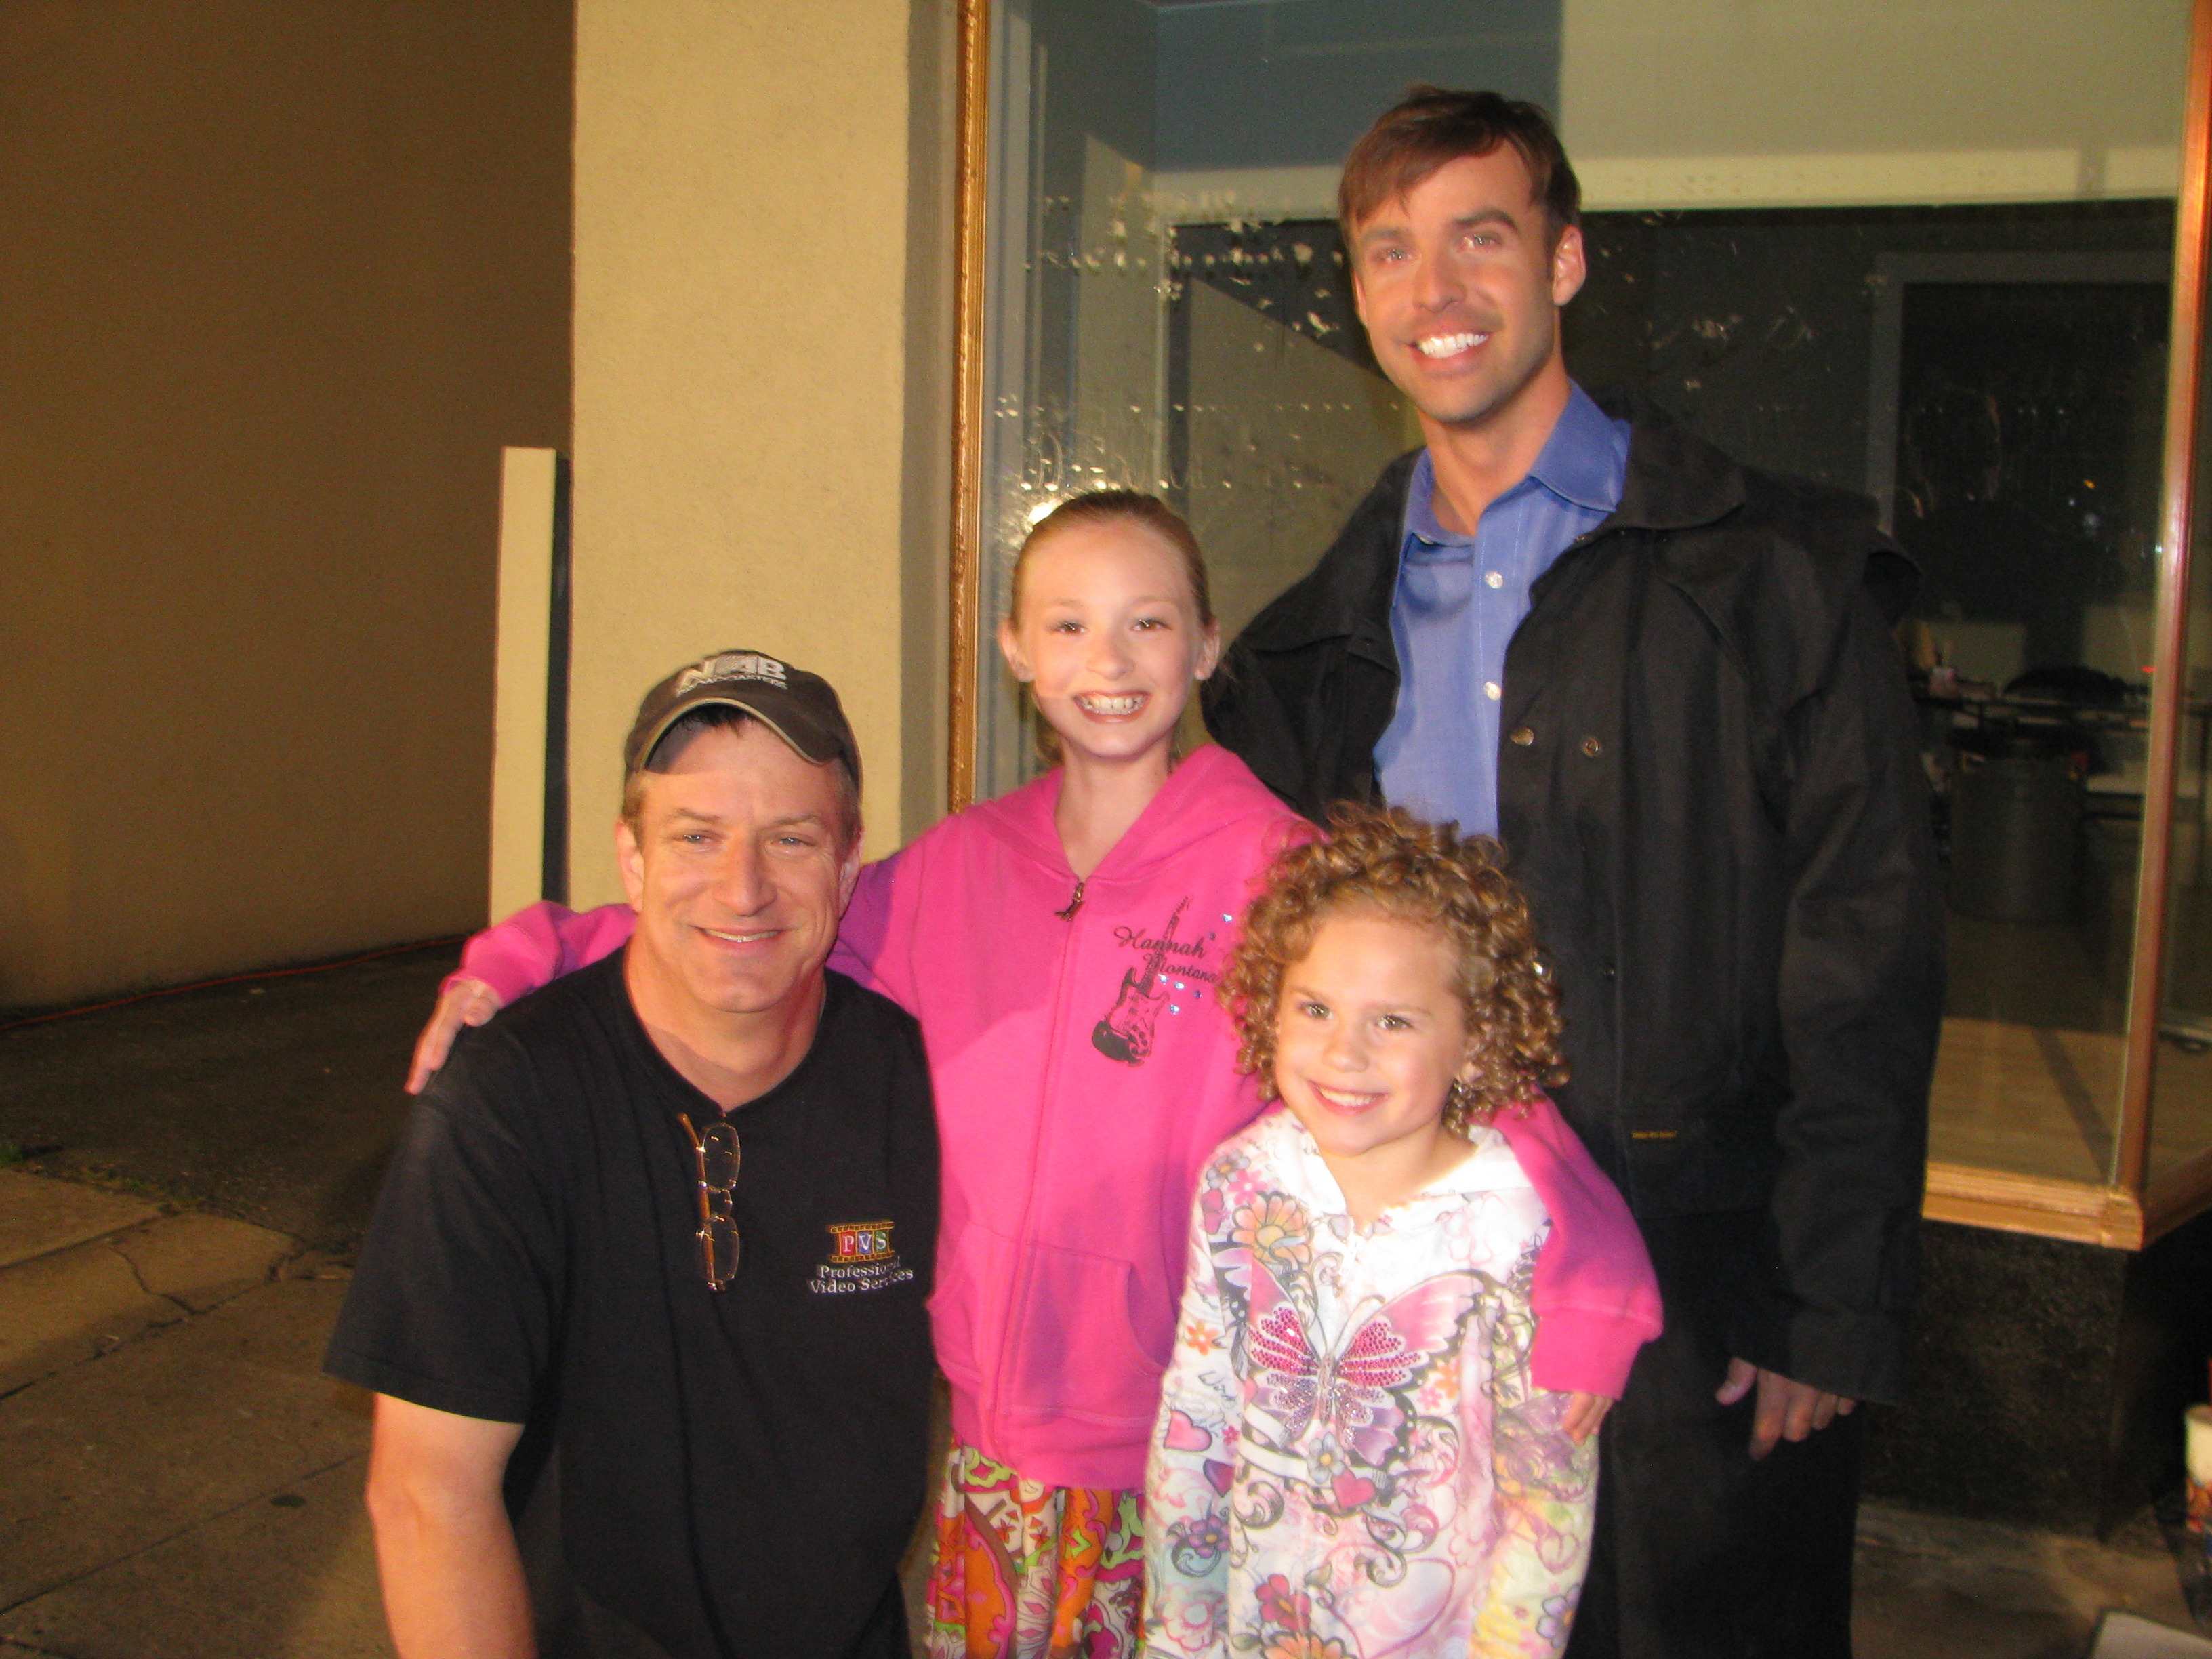 with Bill Rahn, Director/Producer Adam Melton Lead Actor/Producer and Anna Grace Bradley on the set of Pendulum Swings